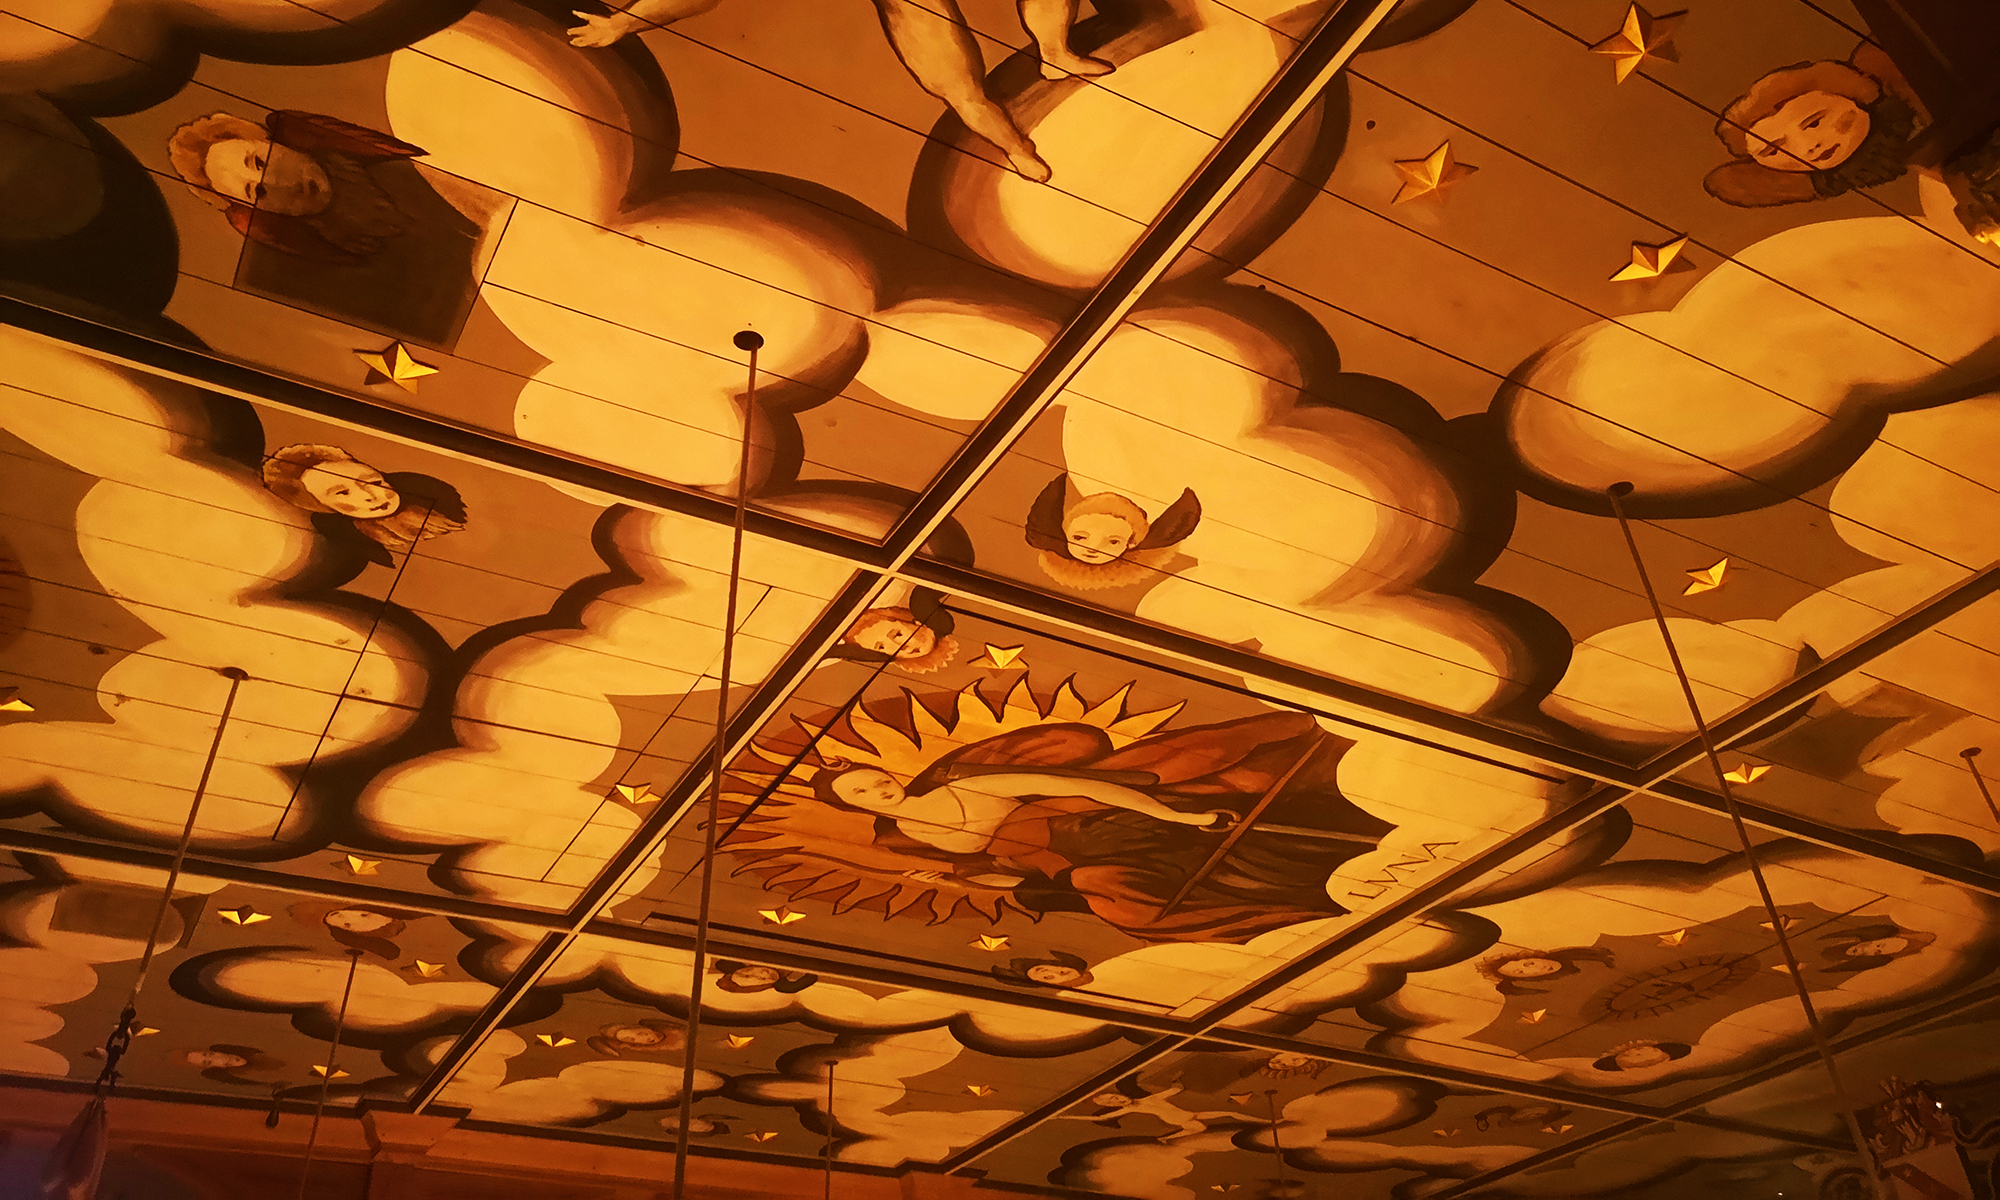 Ceiling of the Sam Wanamaker Playhouse decorated with angels and clouds